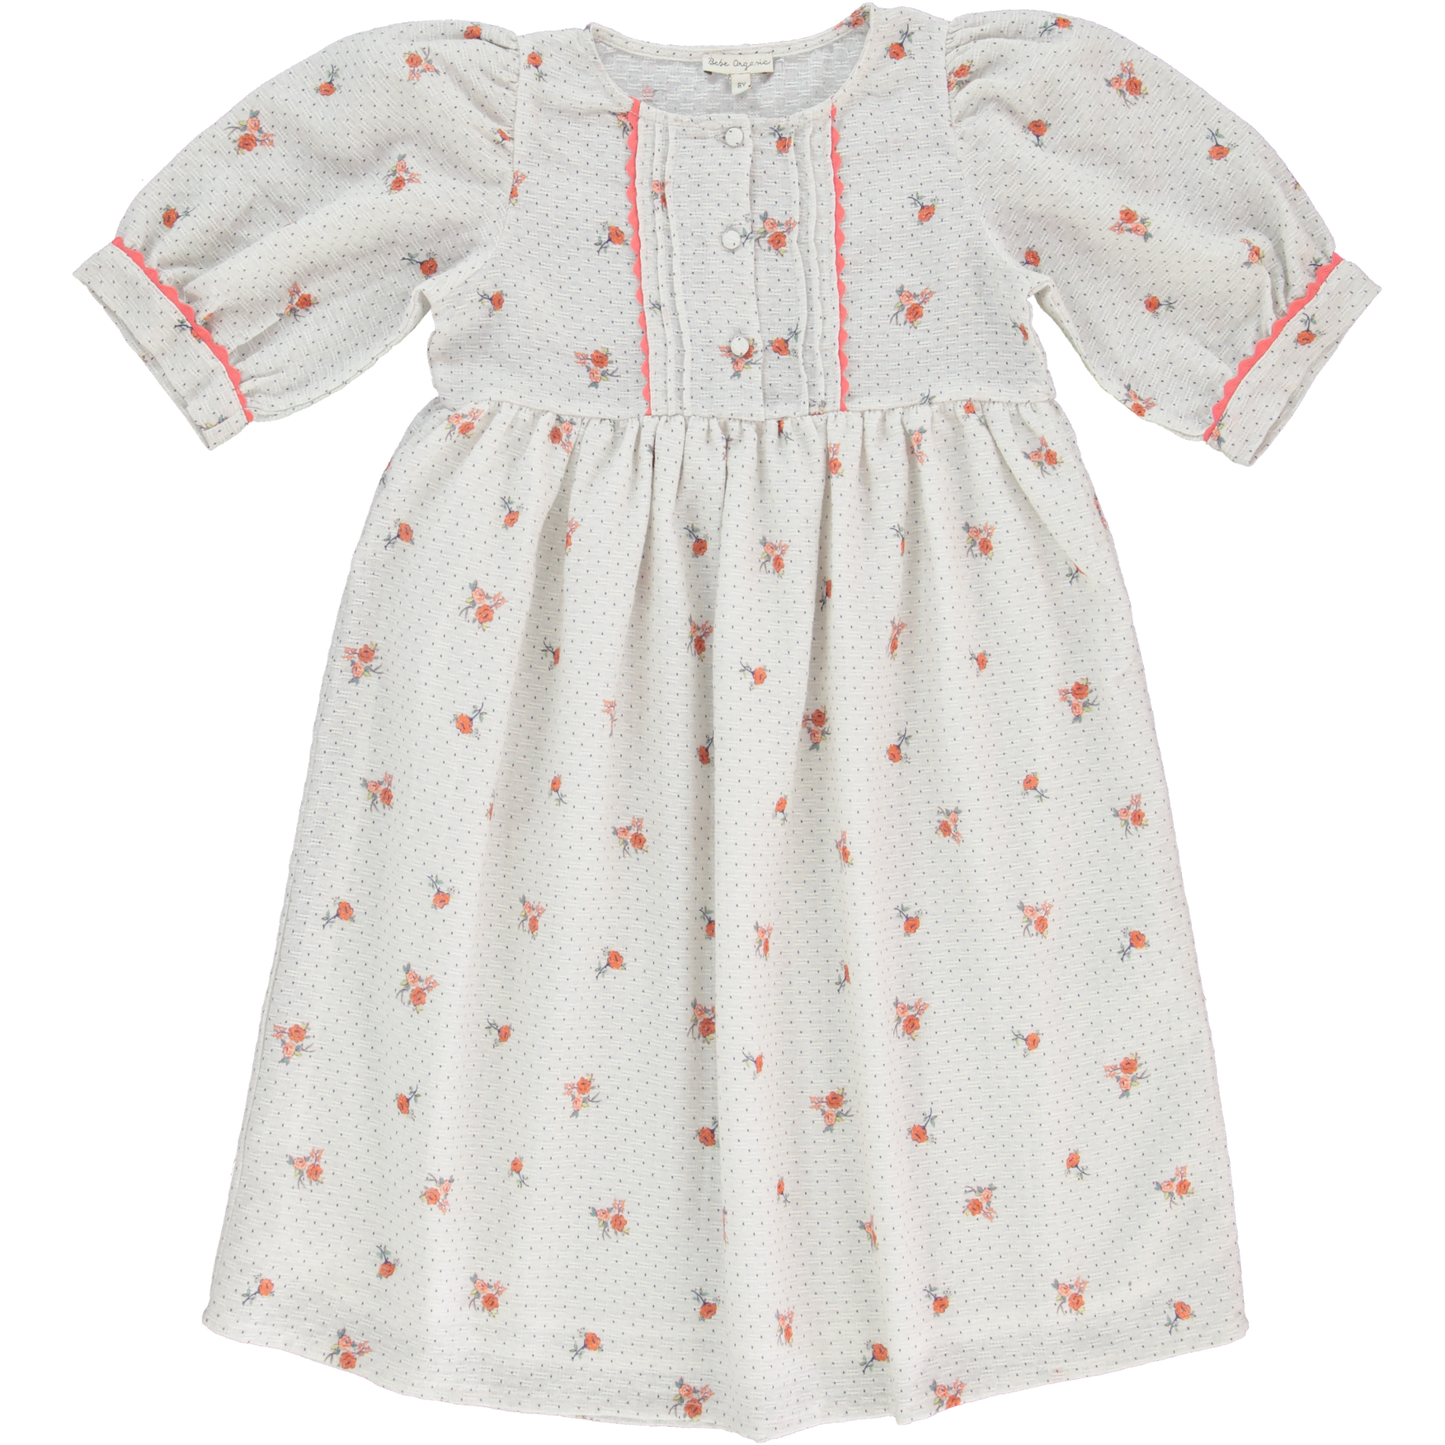 BEBE ORGANIC MISTY WHITE FLORAL DOTTED DRESS